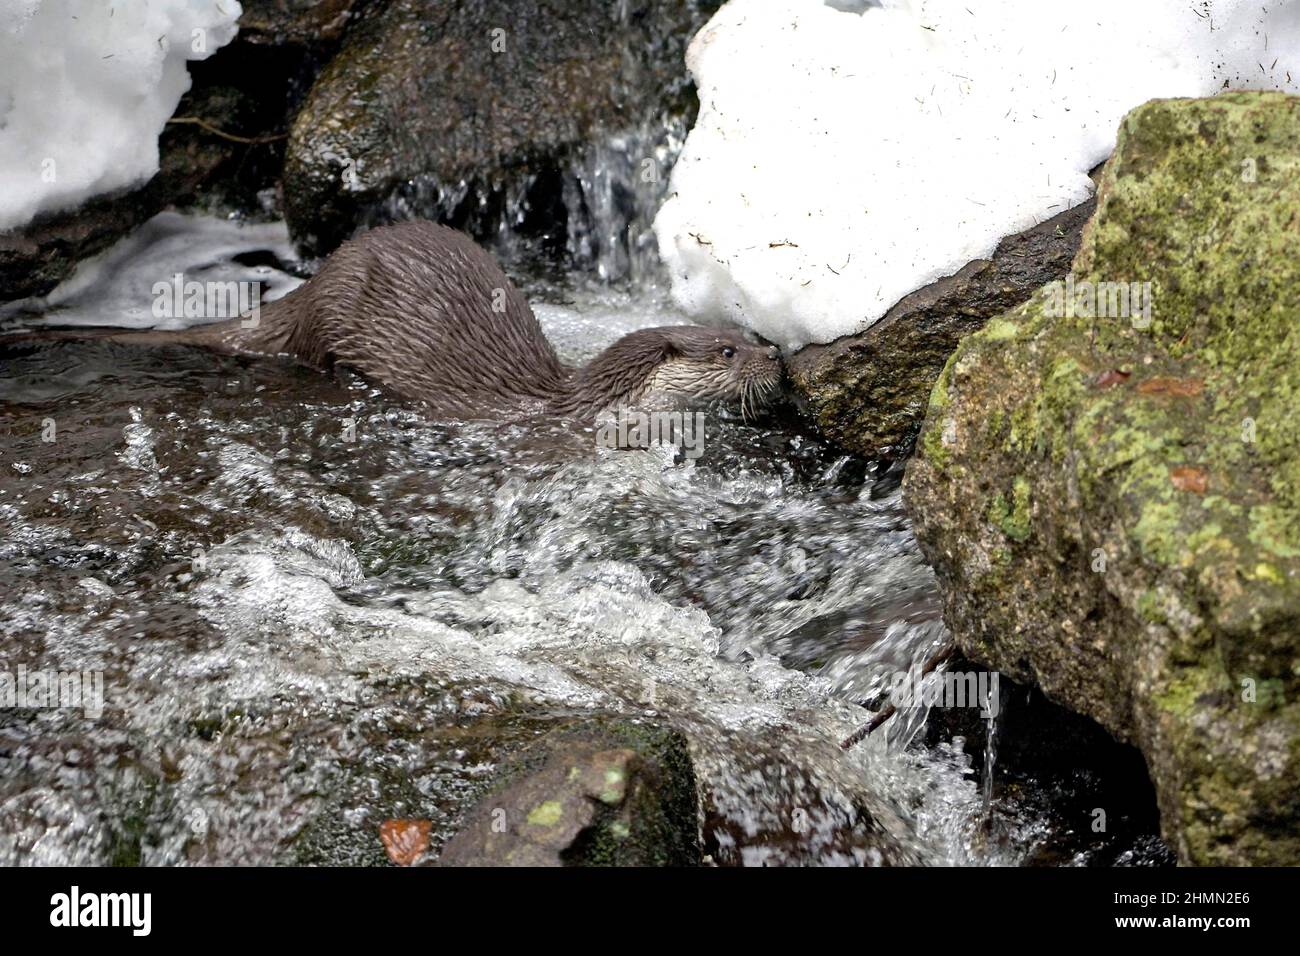 European river otter, European Otter, Eurasian Otter (Lutra lutra), an a brook in winter, side view, Germany Stock Photo